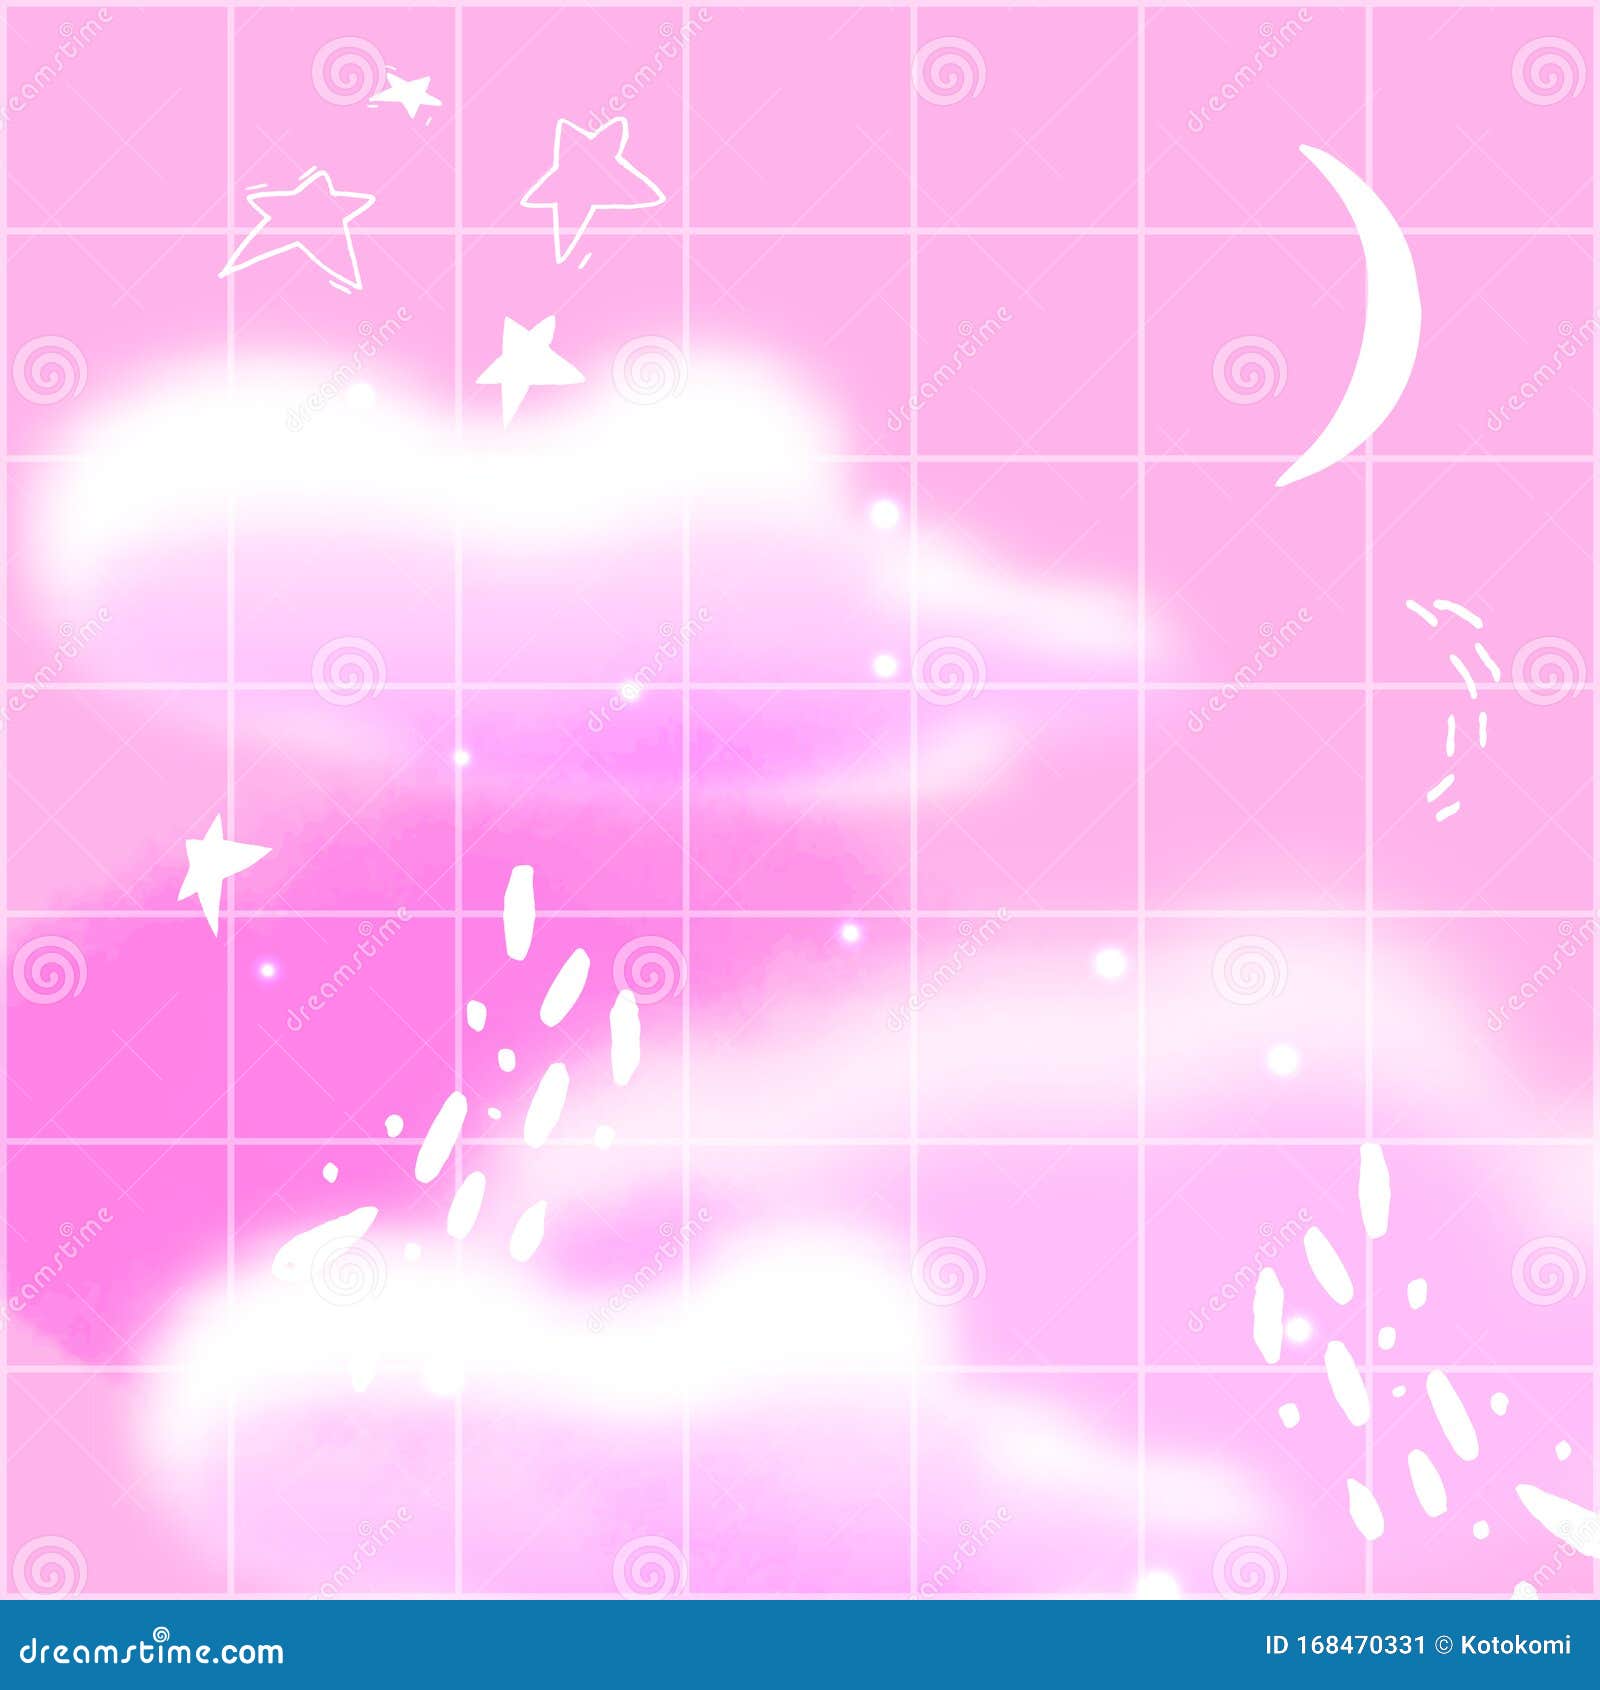 pink night sky with cresent, fluffy clouds and hand darwn stars. dream aesthetics , retro fantasy background